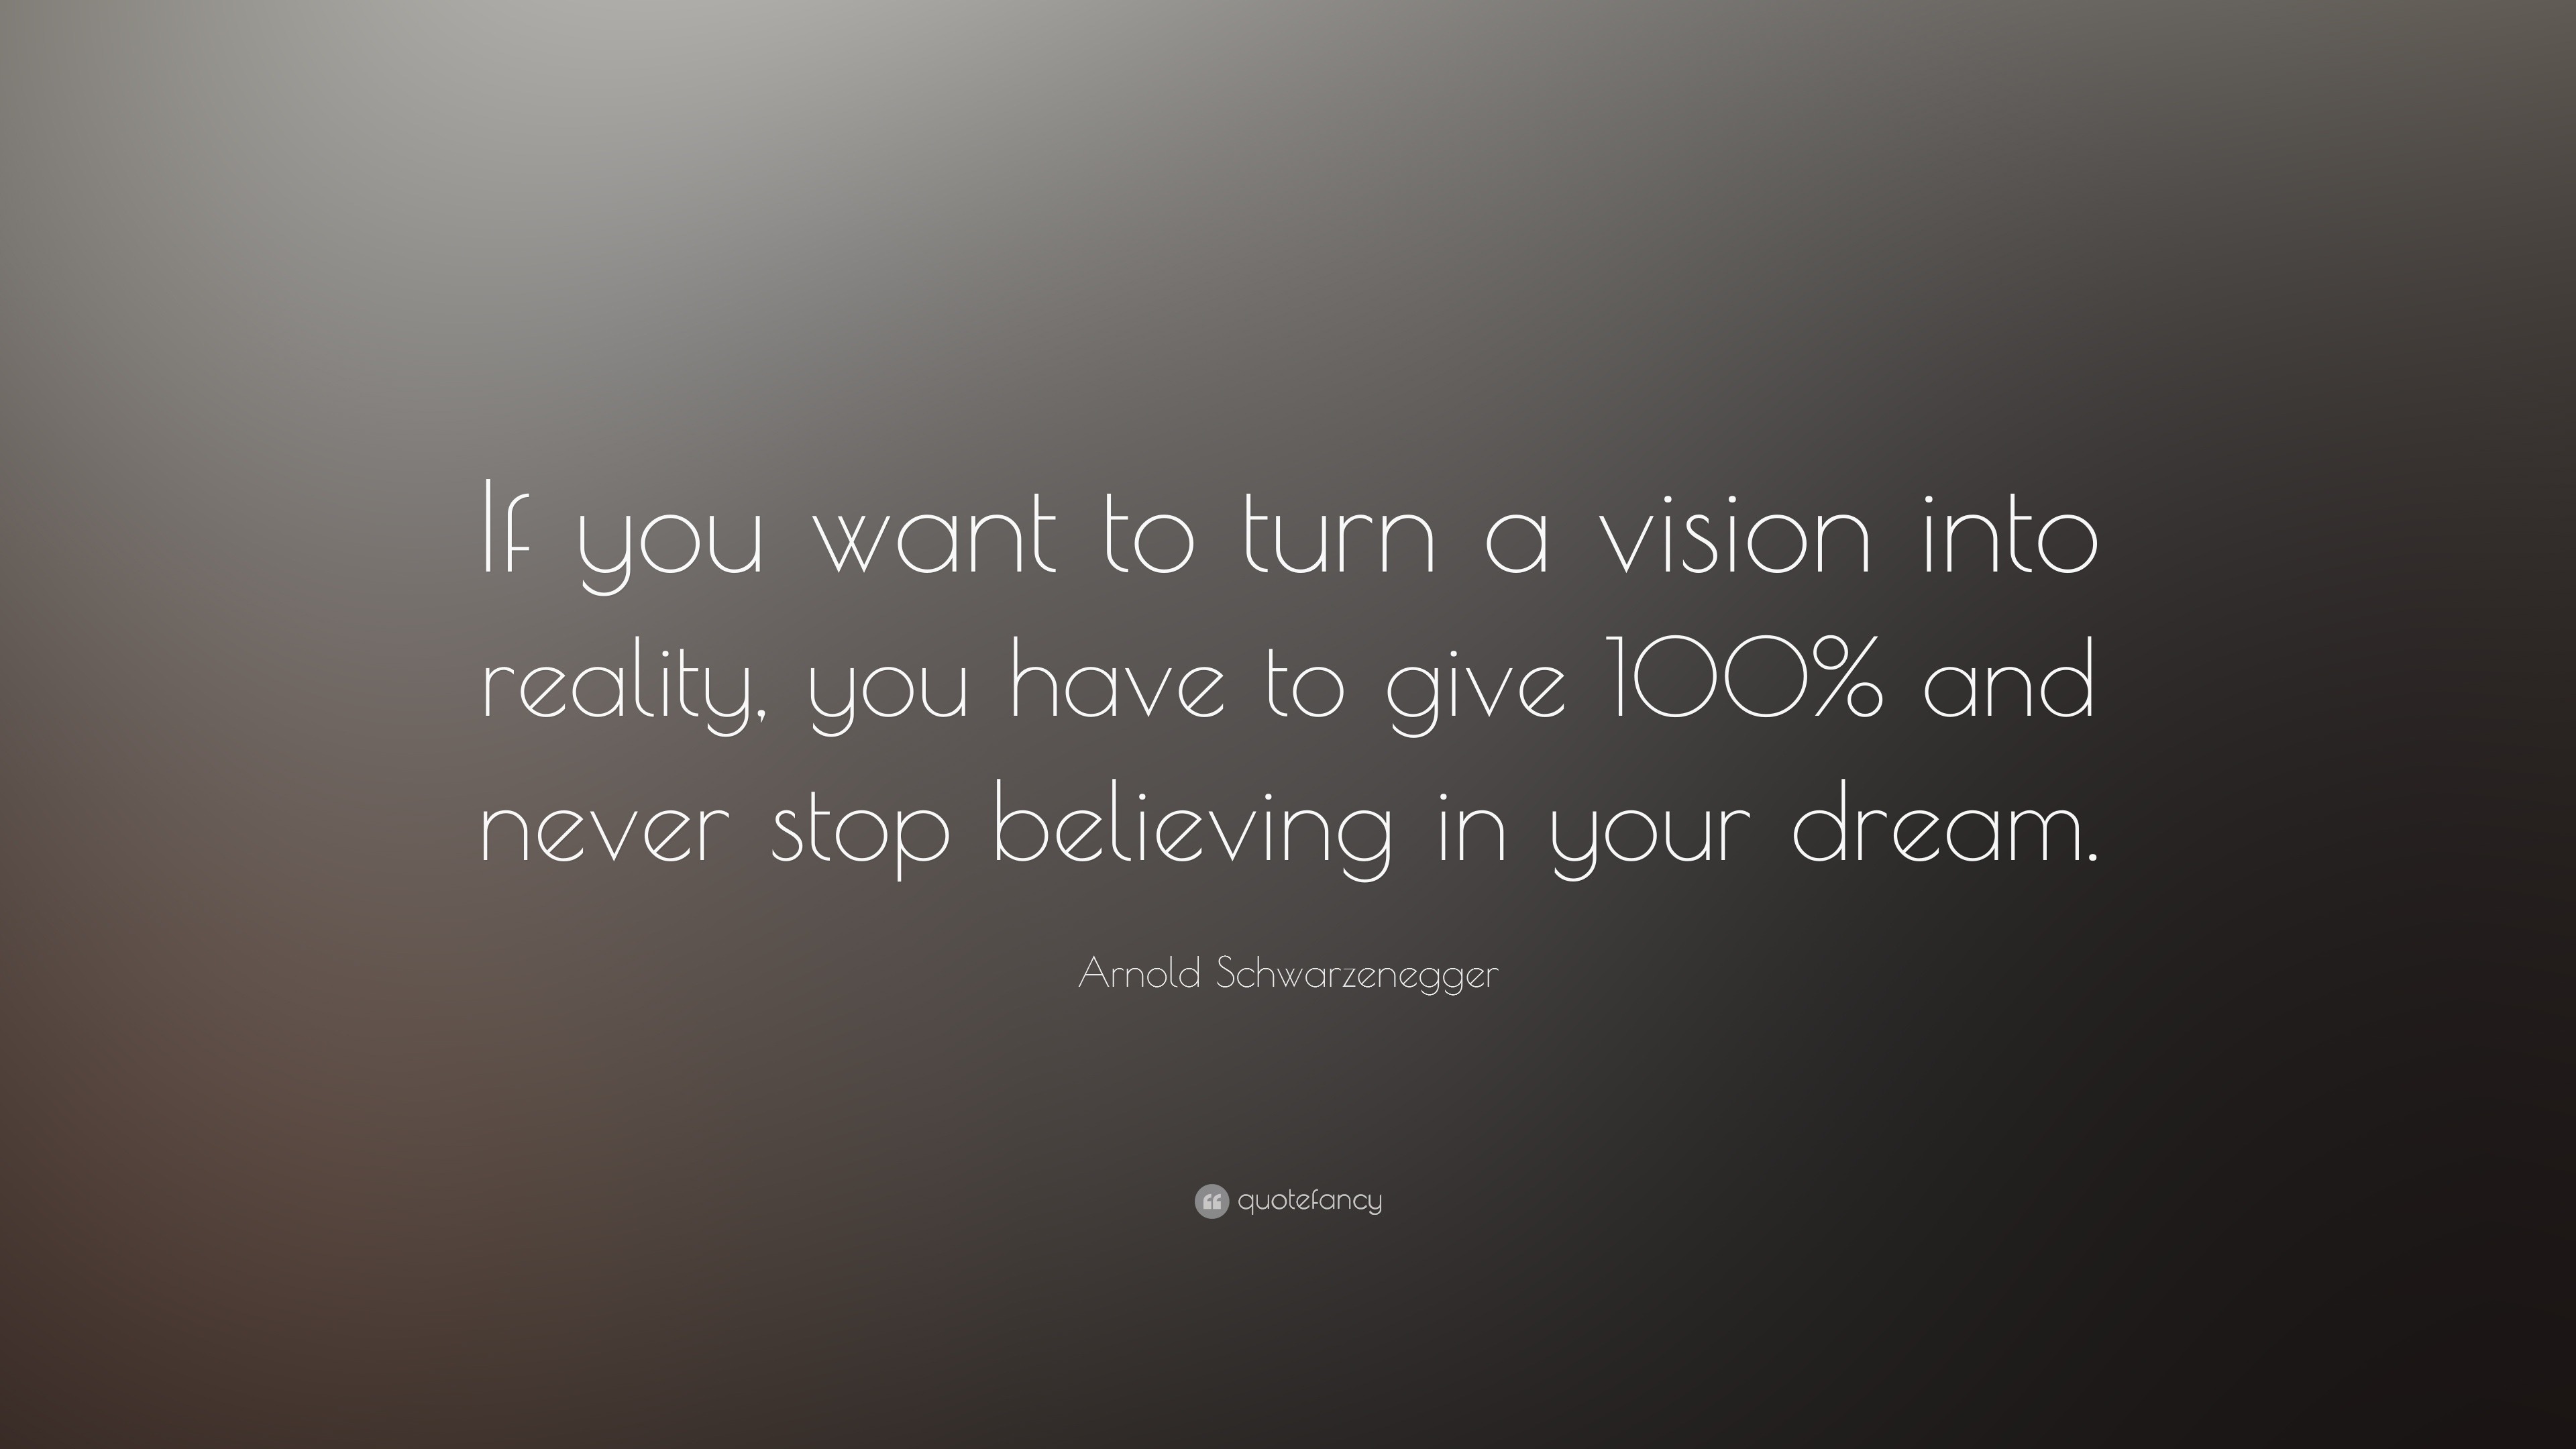 Arnold Schwarzenegger Quote: “If you want to turn a vision into reality